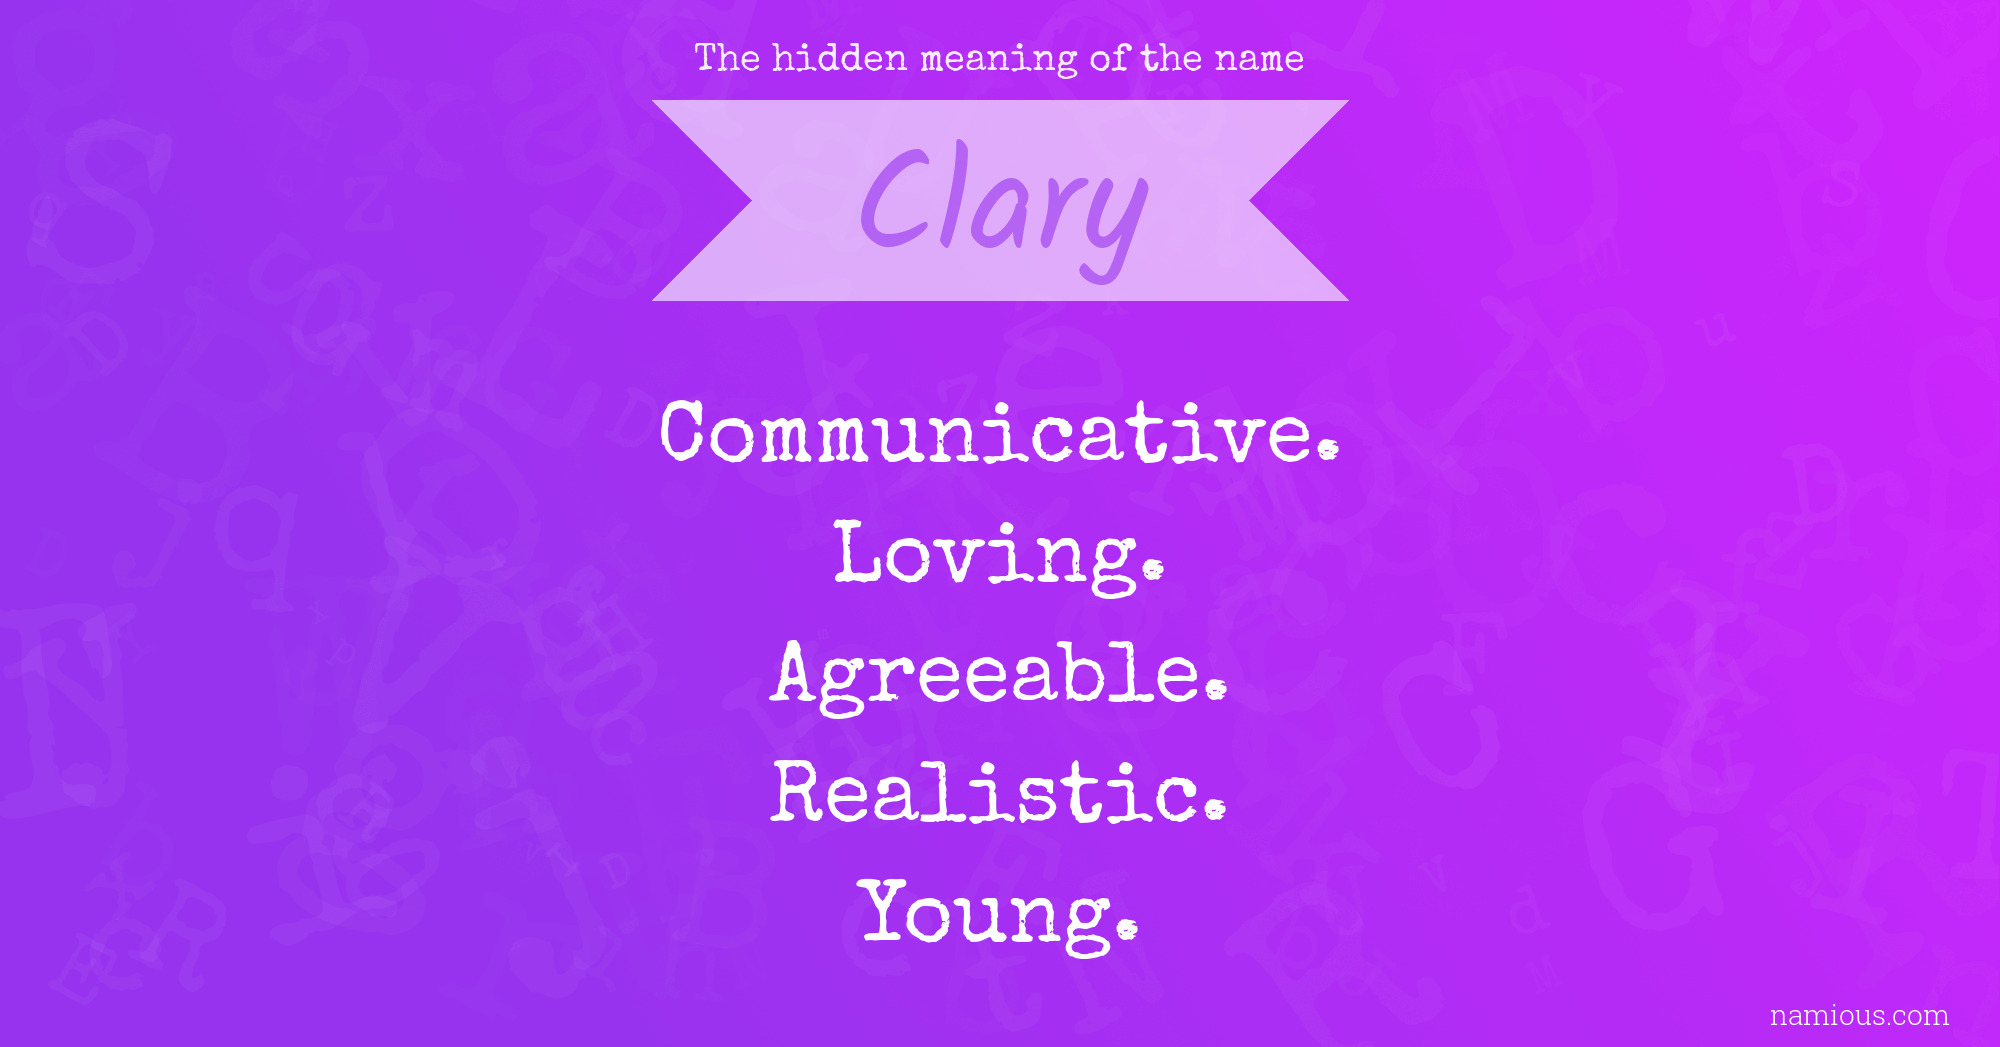 The hidden meaning of the name Clary